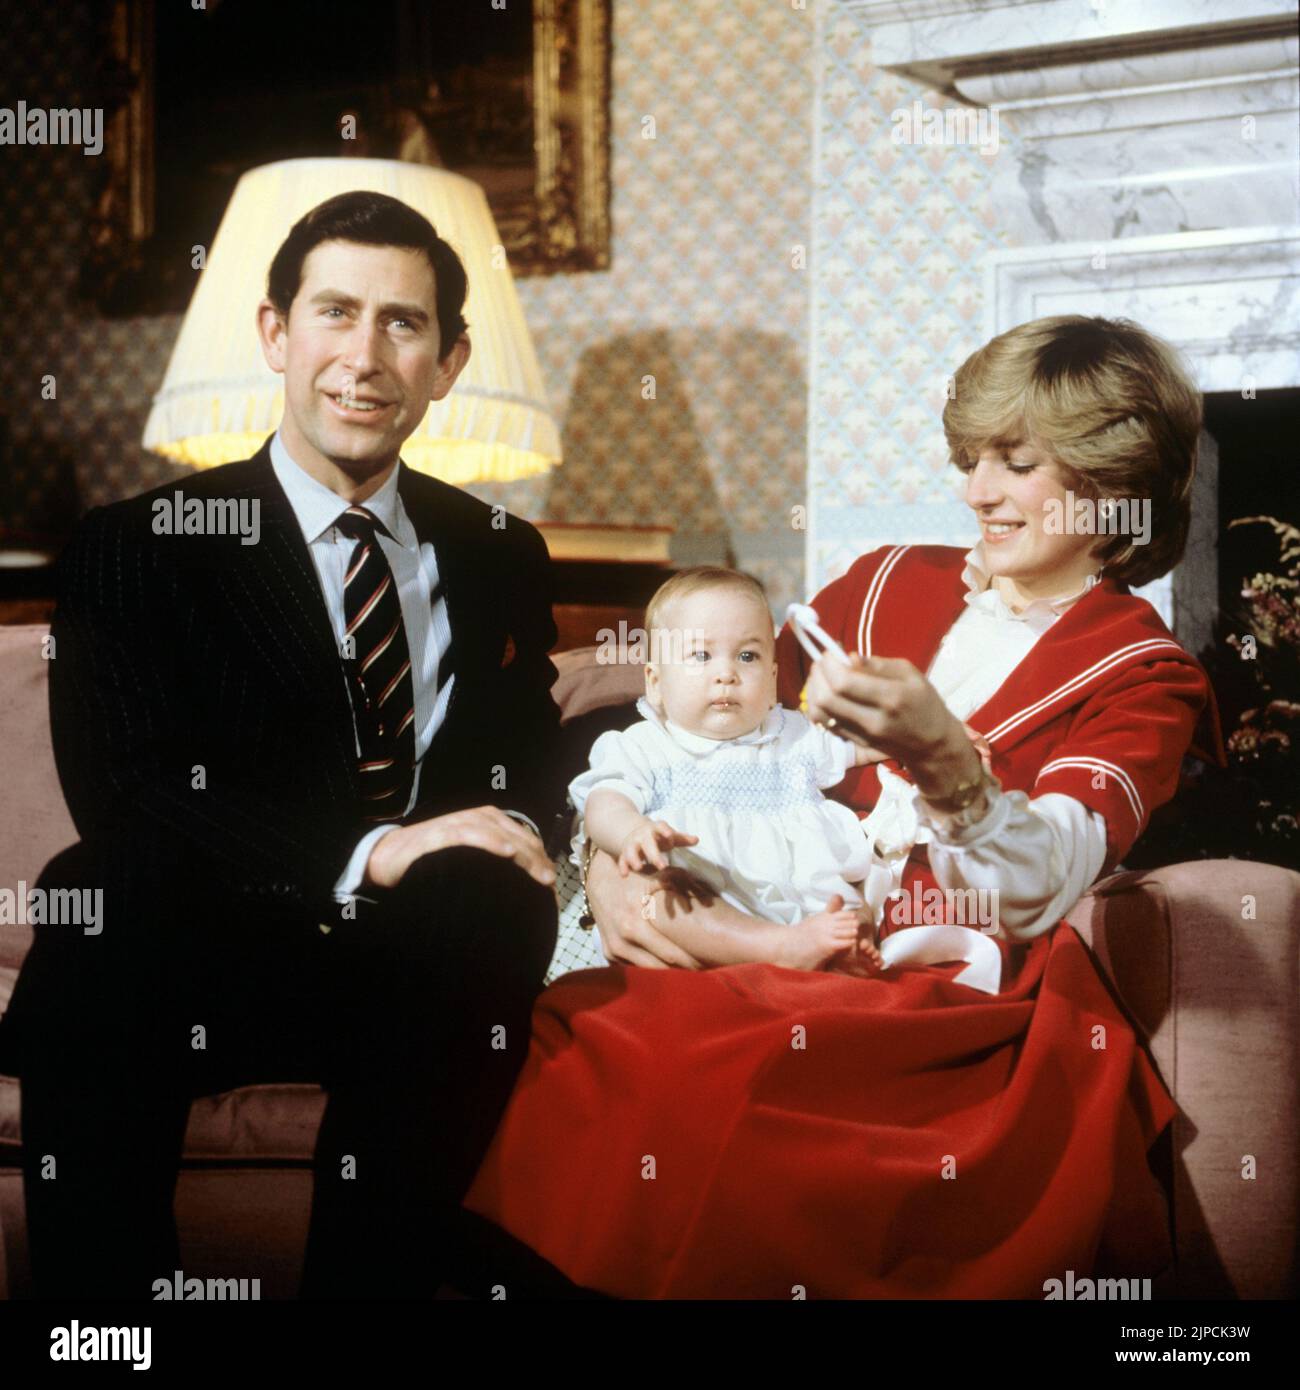 File photo dated 22/12/82 of Prince Charles, the Princess of Wales and Prince William play with a rattle on the sofa at Kensington Palace London. Consumer Prices Index (CPI) inflation reached 10.1 percent last month, the biggest jump in the cost of living since February 1982, when CPI reached 10.4 percent, according to estimates. Issue date: Wednesday August 17, 2022. Stock Photo